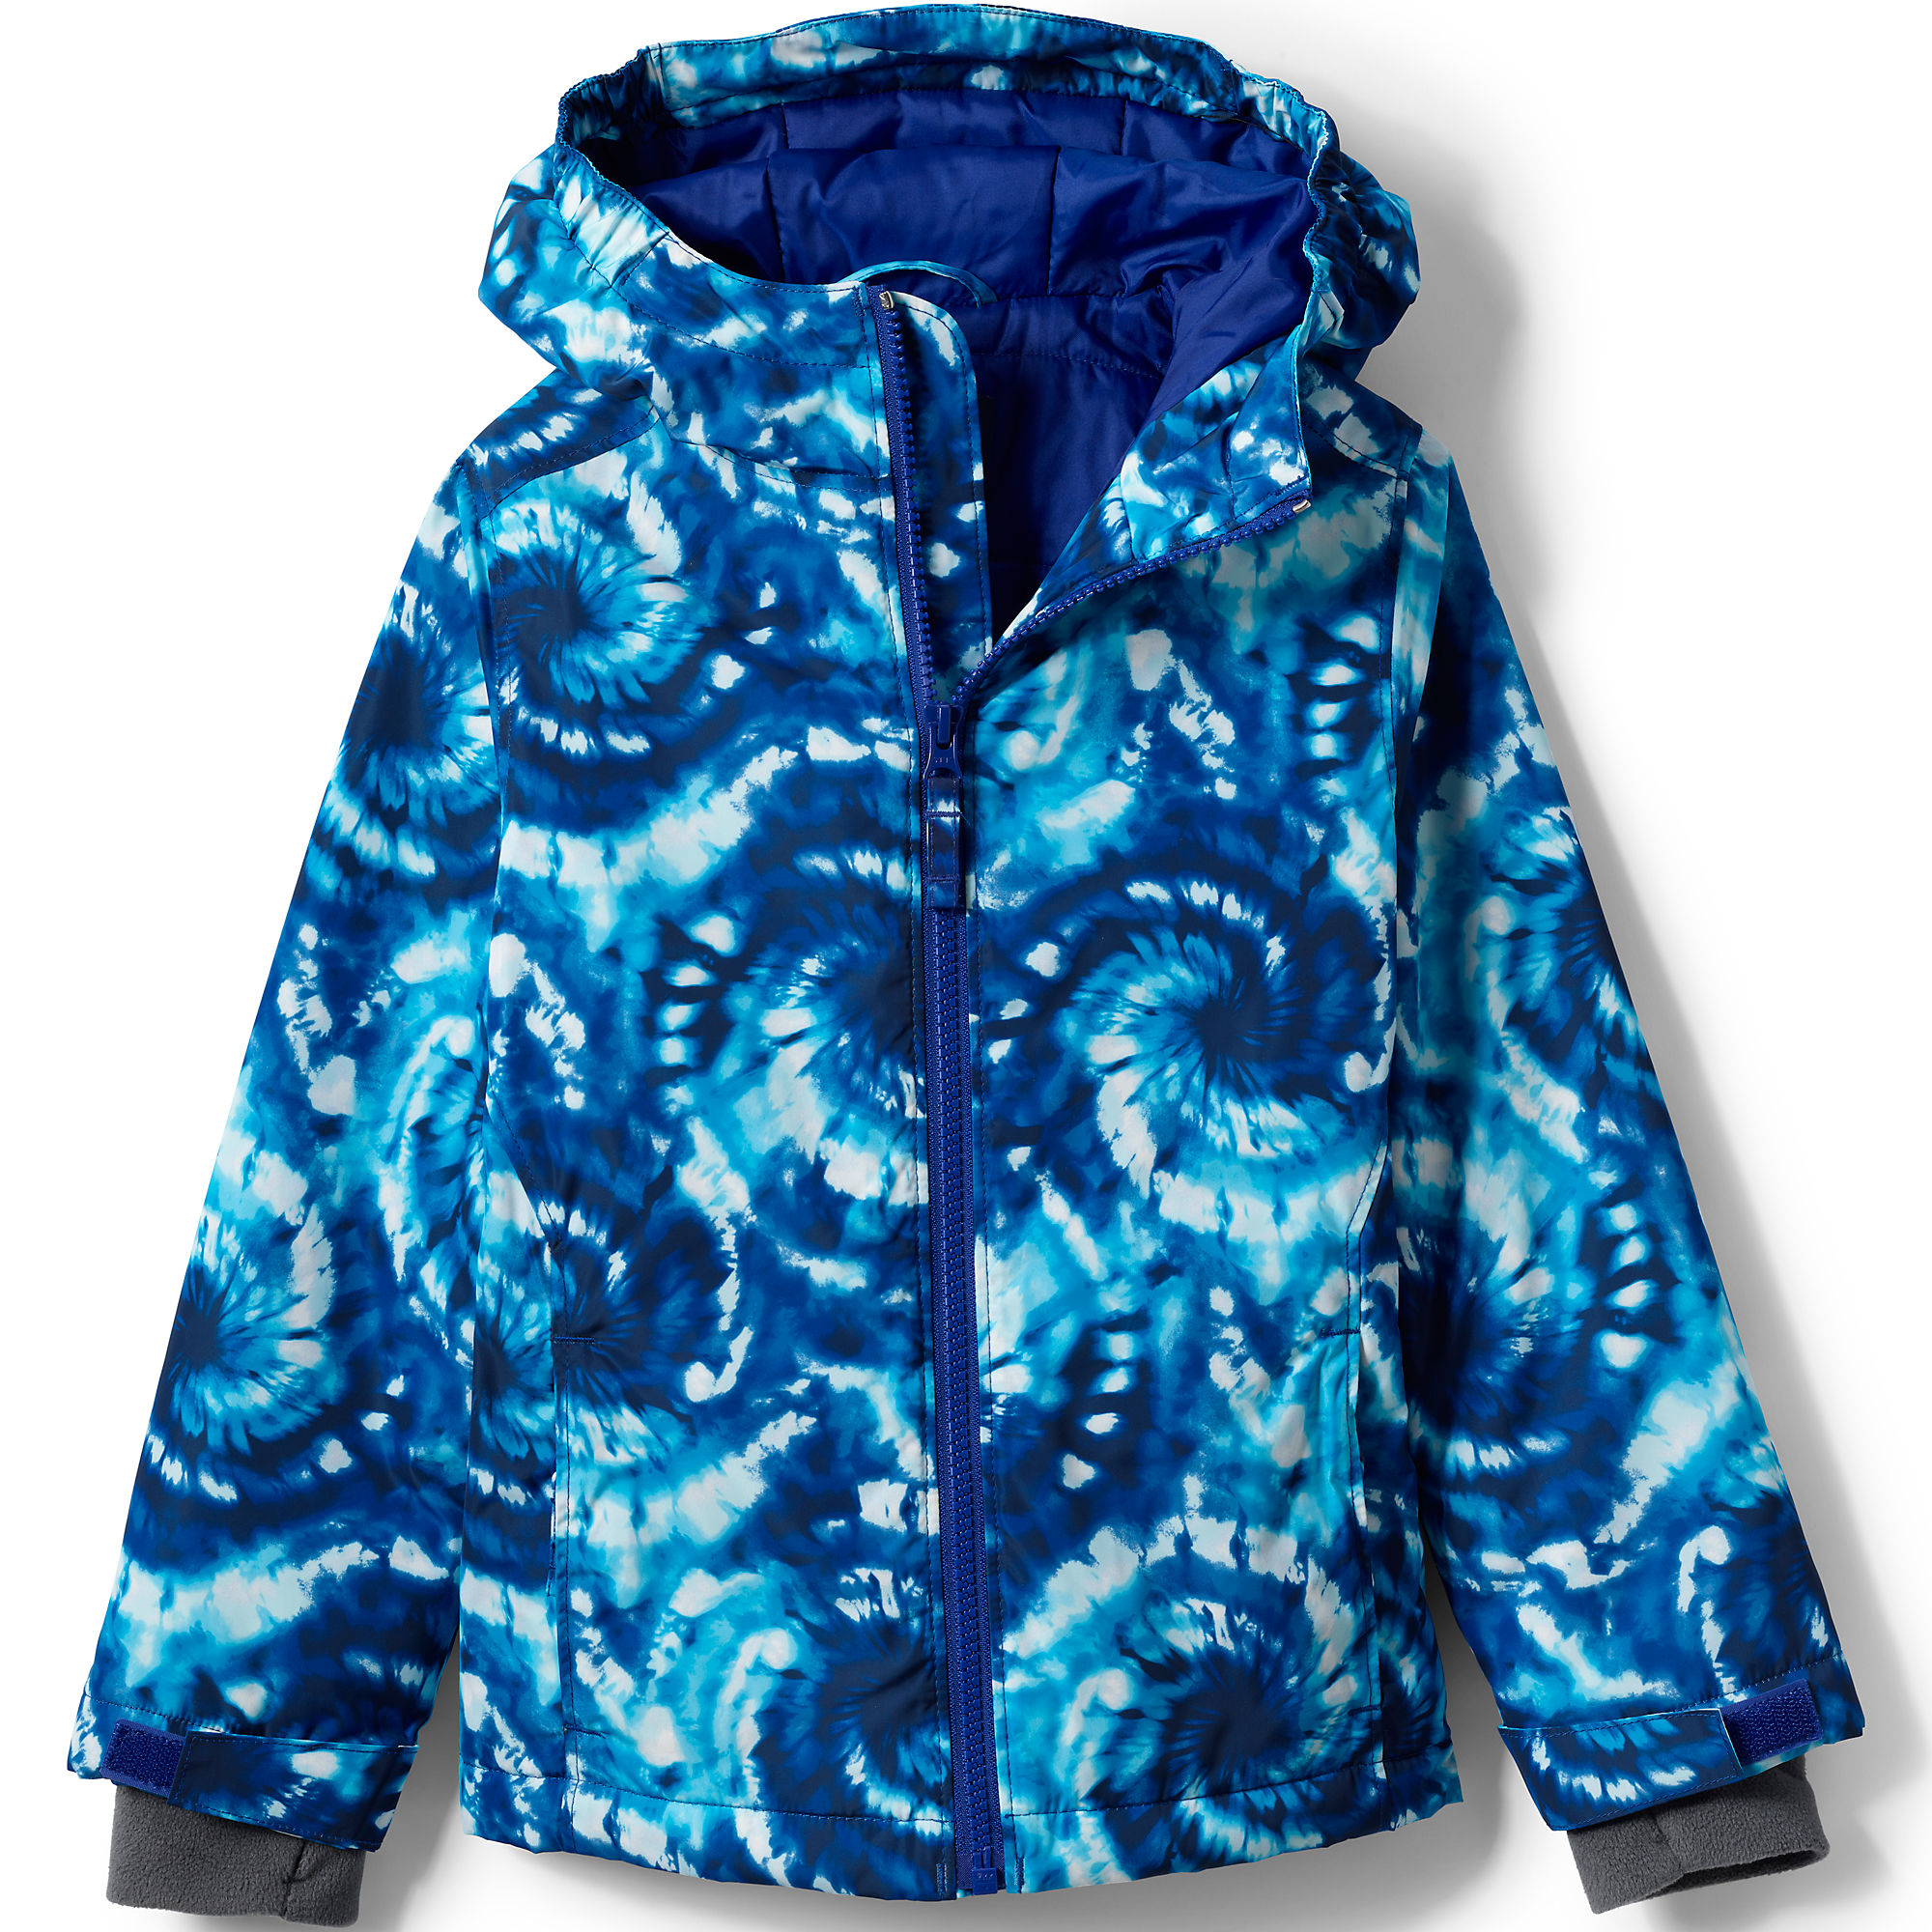 Lands' End Kids': Winter Jacket (Navy Tie Dye) $21, Winter Boots $10.50, Girls' Swimsuit (Teal Tie Dye) $6, Boys' Athletic Shorts (Colorblock) $4.50 & More + Free Shipping $99+